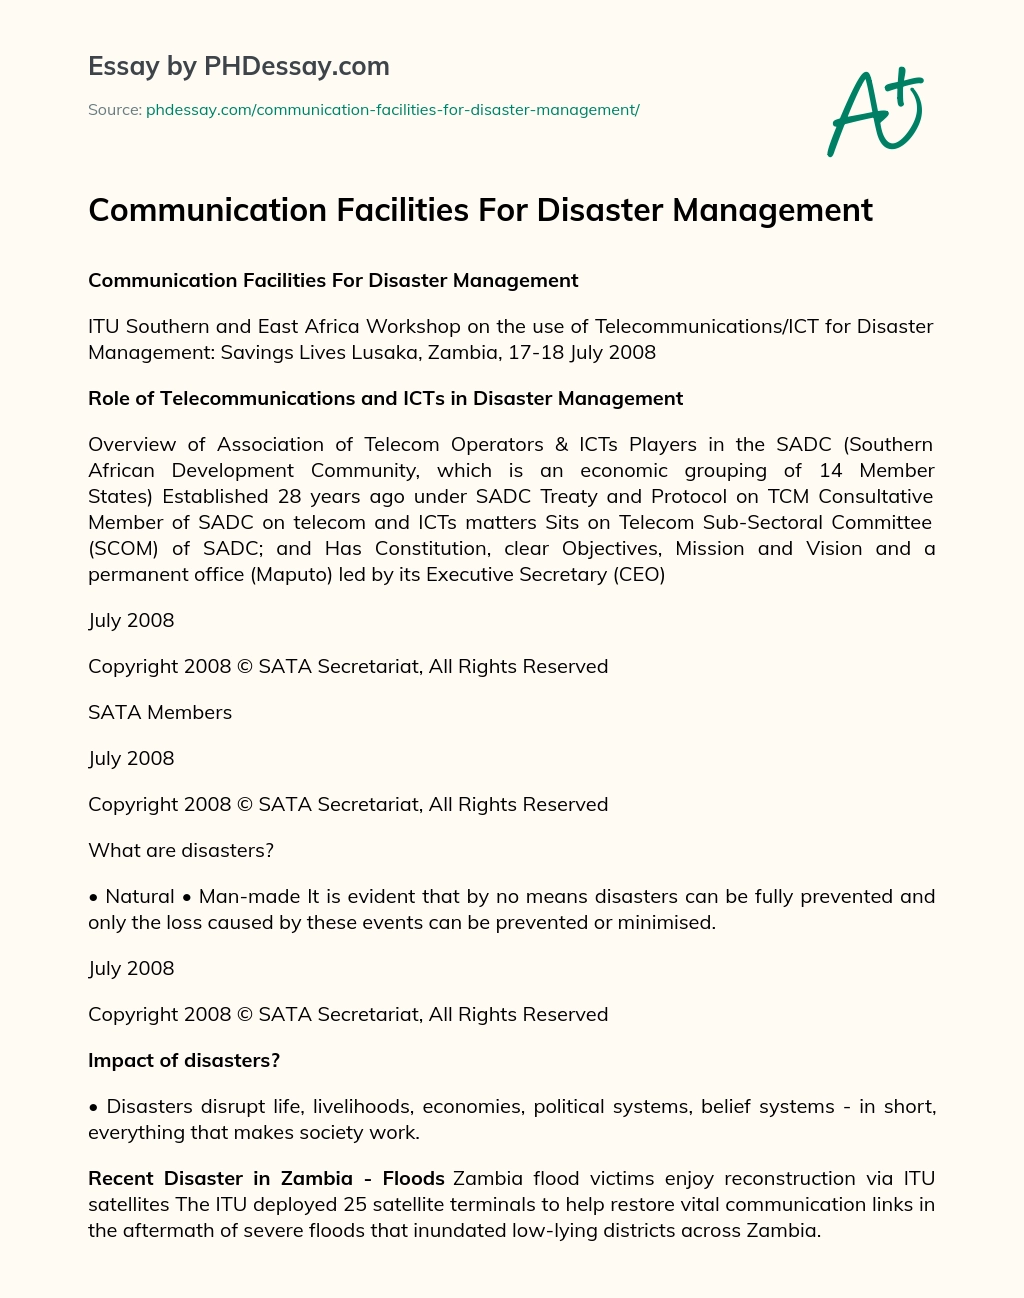 Communication Facilities For Disaster Management essay